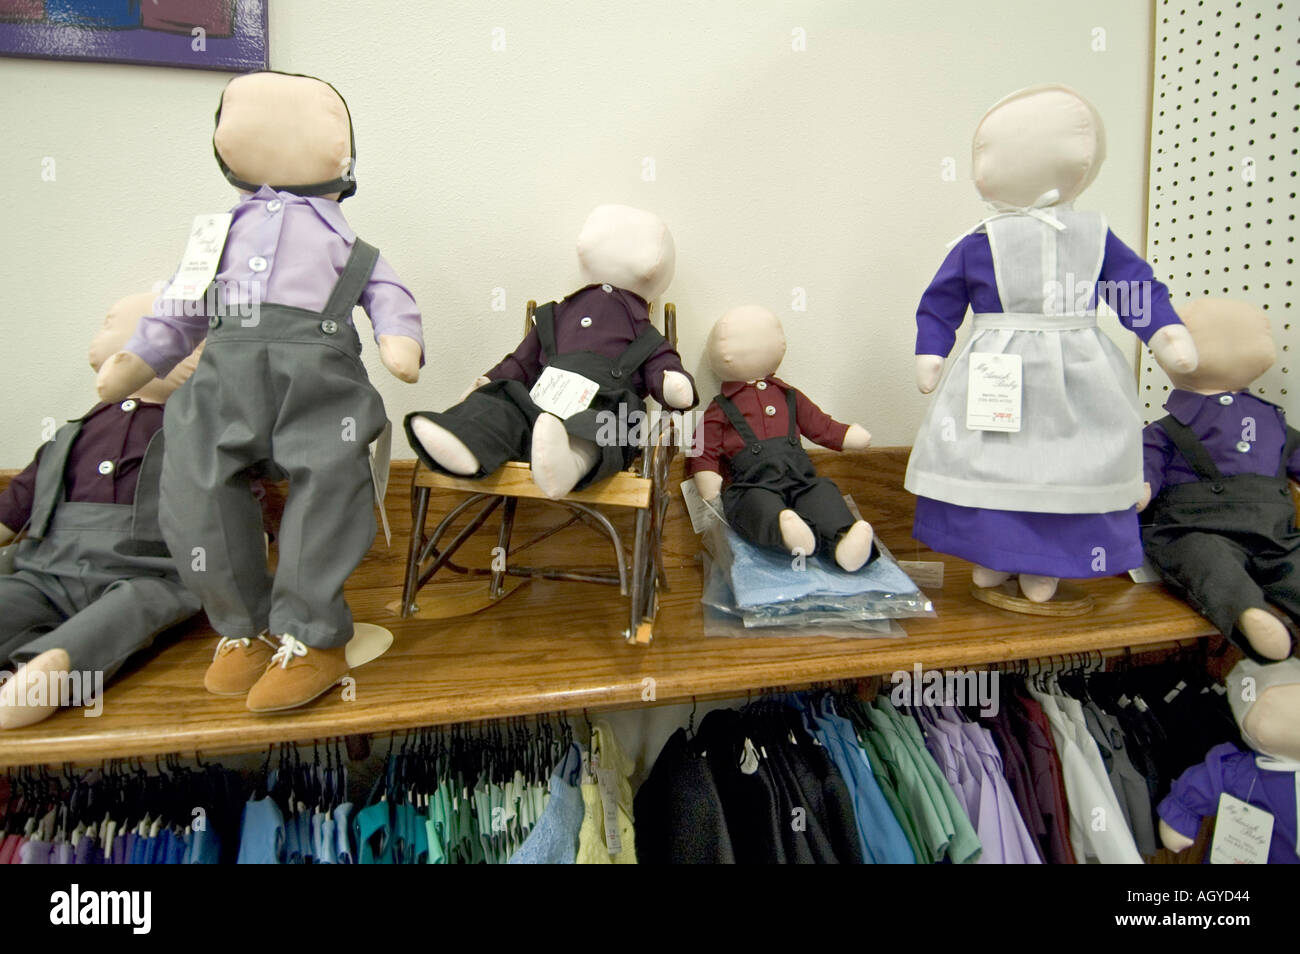 Amish Dolls High Resolution Stock Photography and Images - Alamy